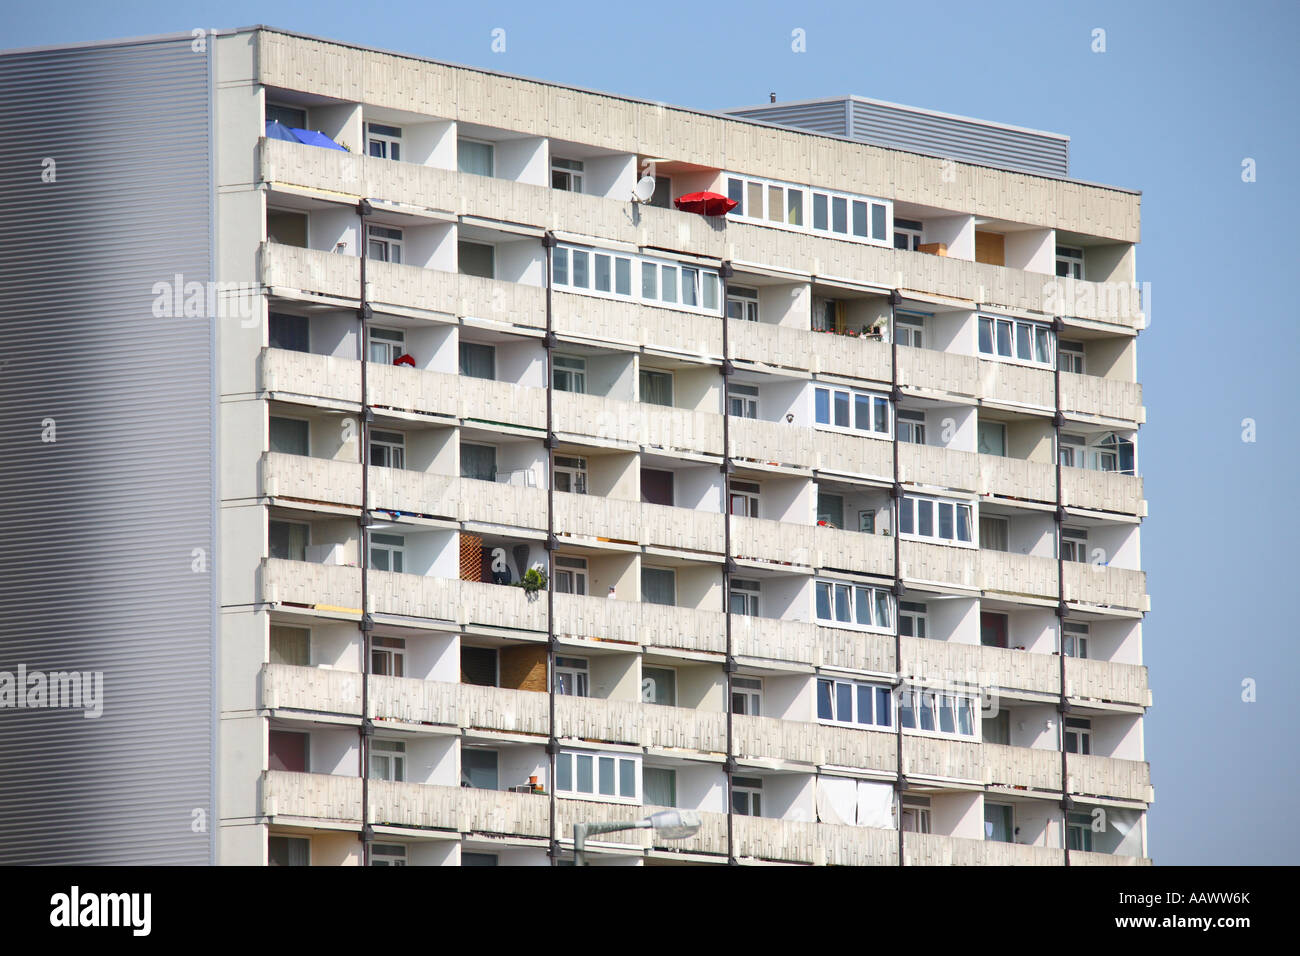 Apartment house in typical 1970's architecture, Munich, Bavaria, Germany Stock Photo